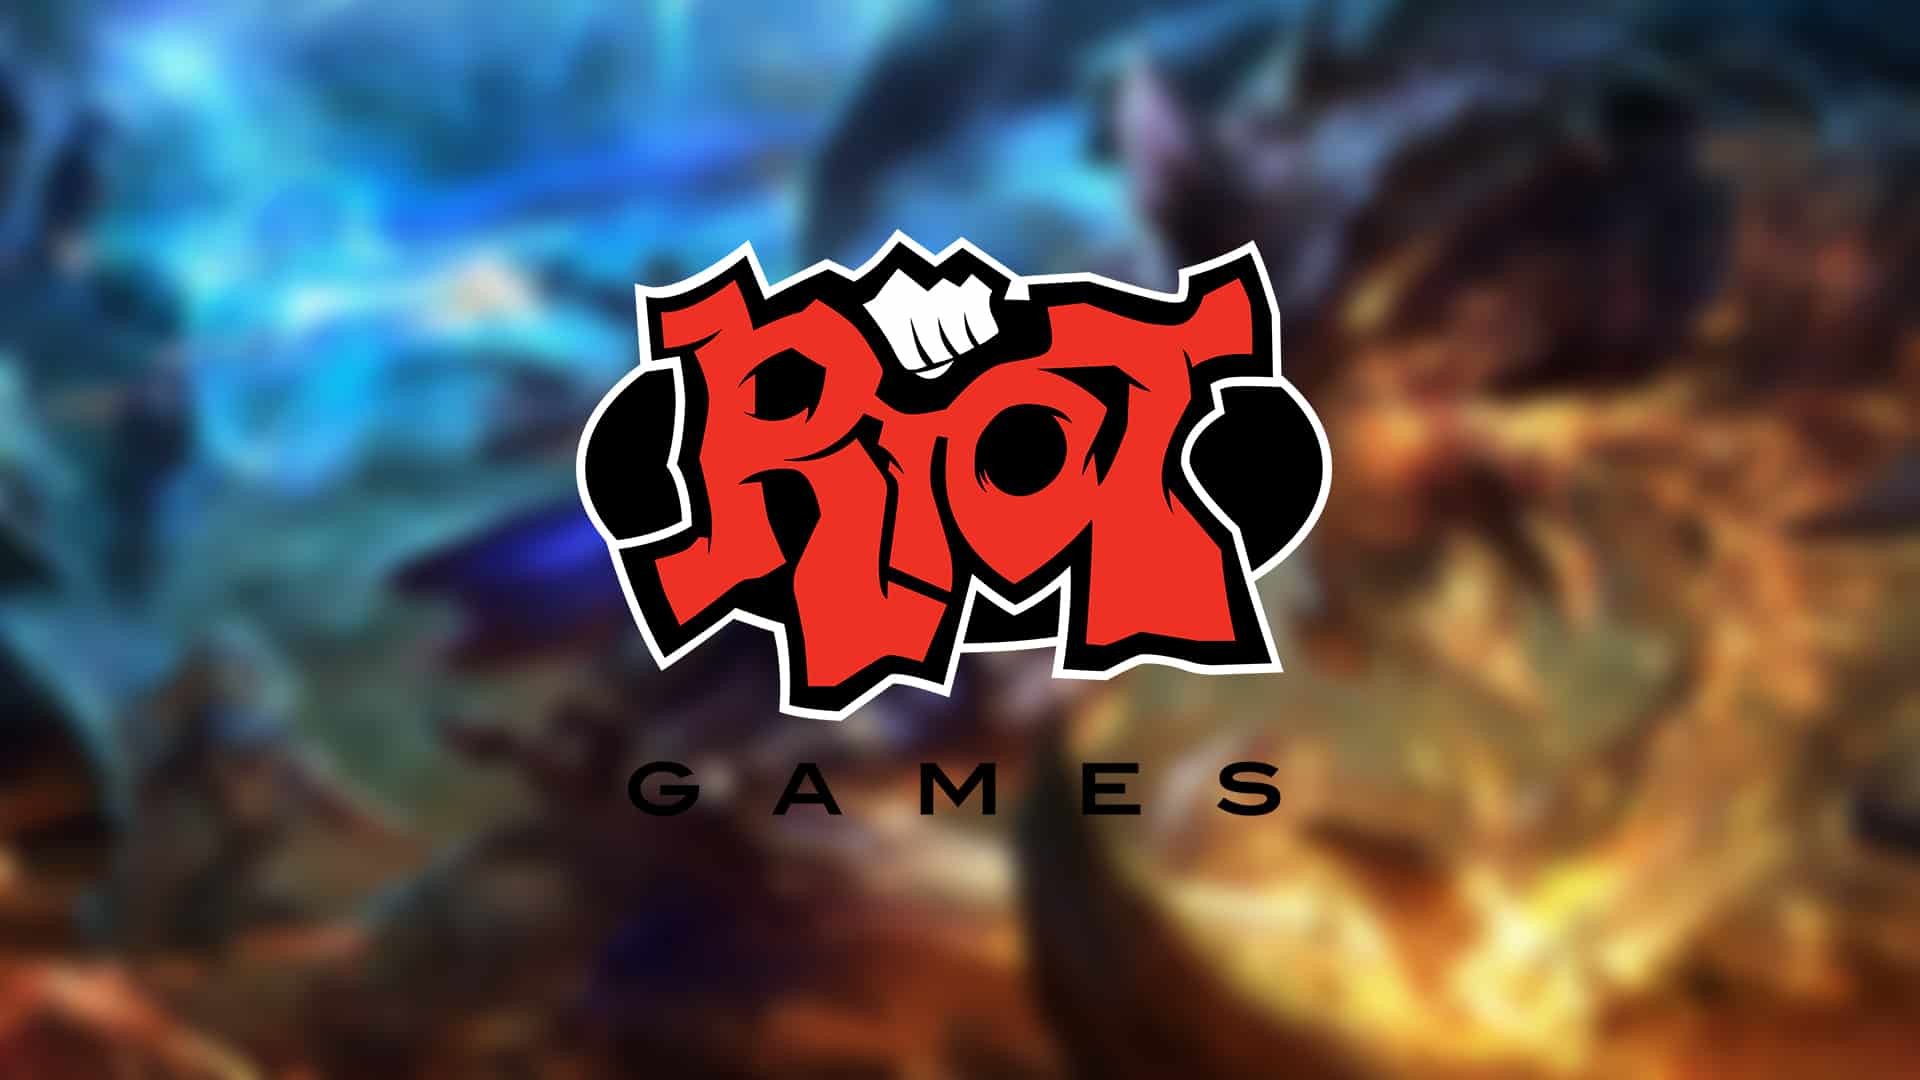 Riot games league. Riot games. Картинка Riot games. Riot games игры на андроид. Команда Riot games.